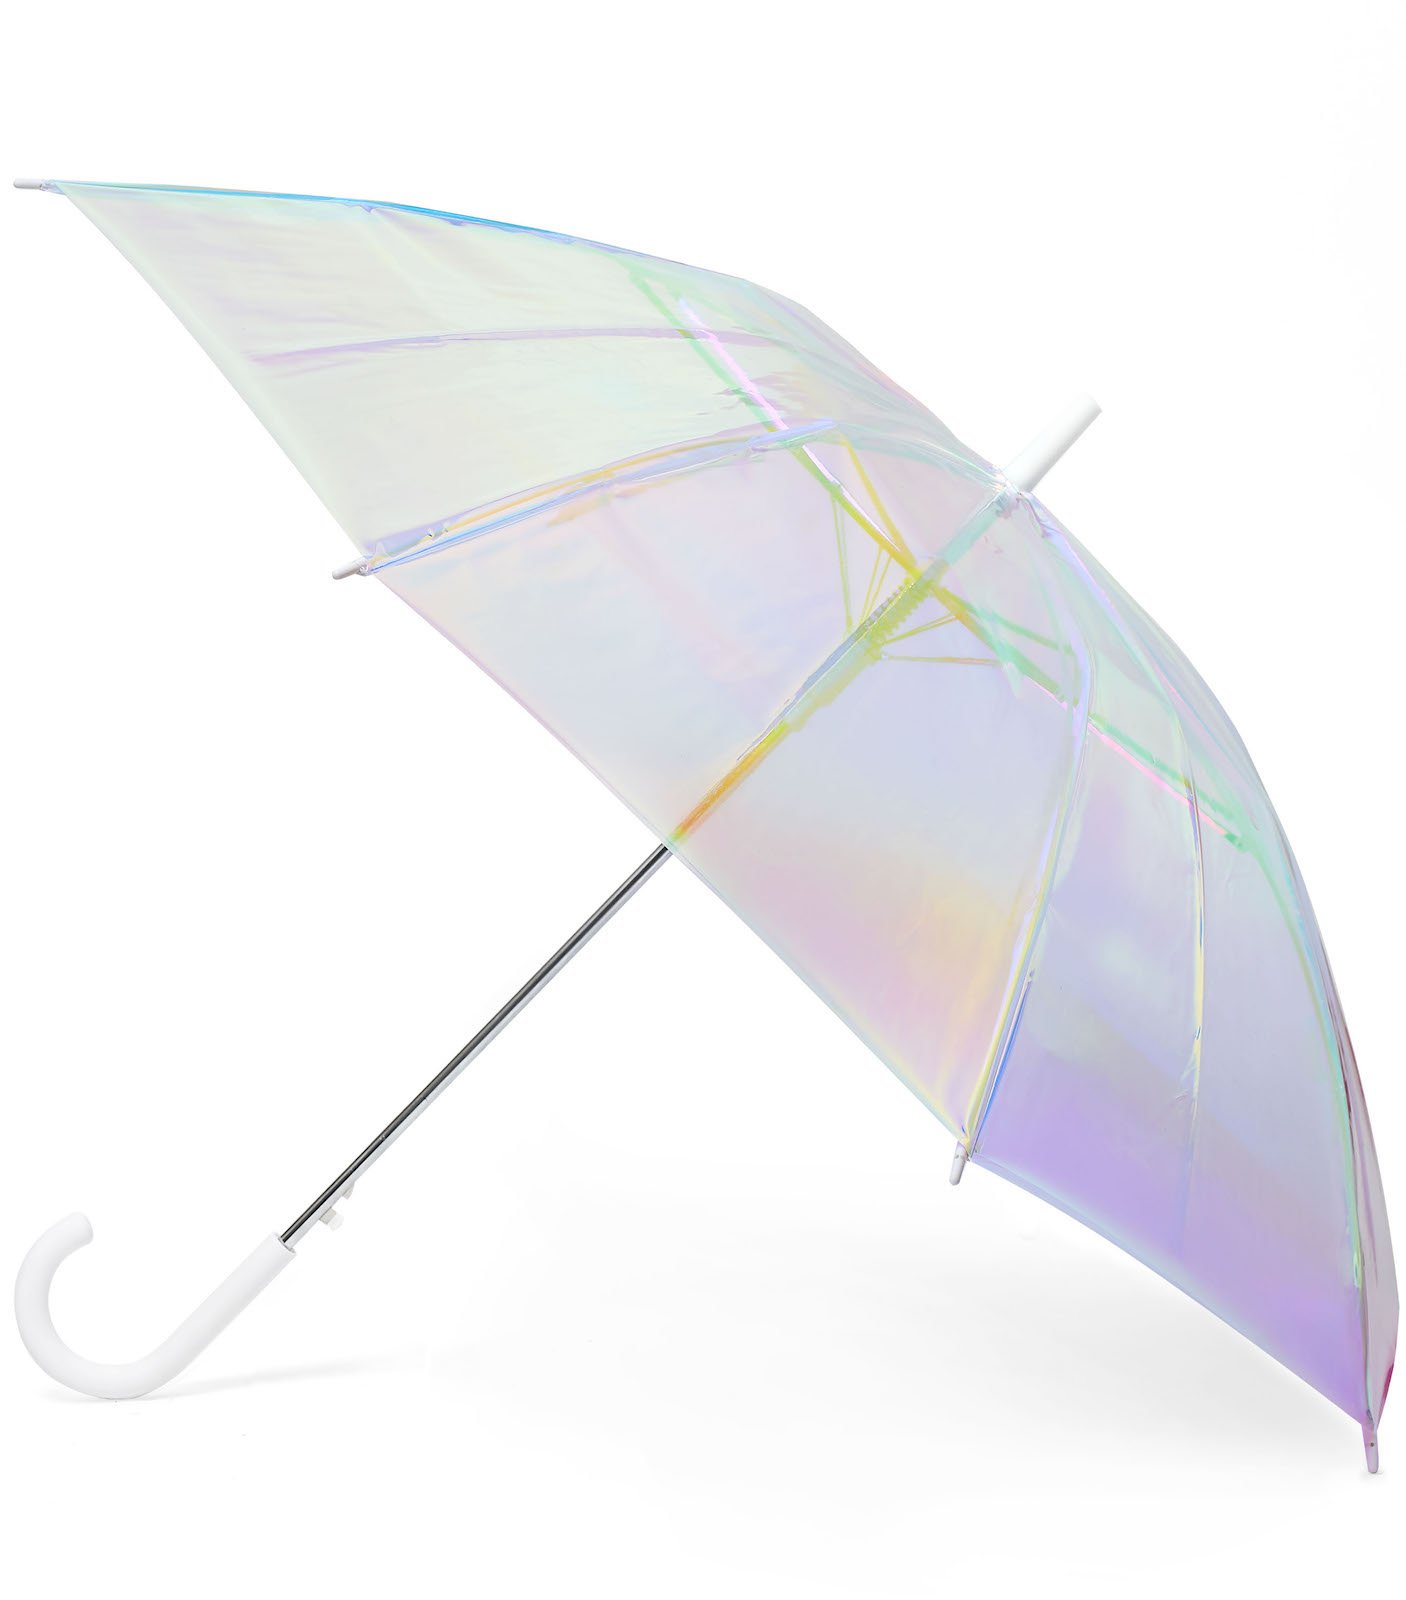 product shot of a translucent wedding umbrella for rain with holographic coloring